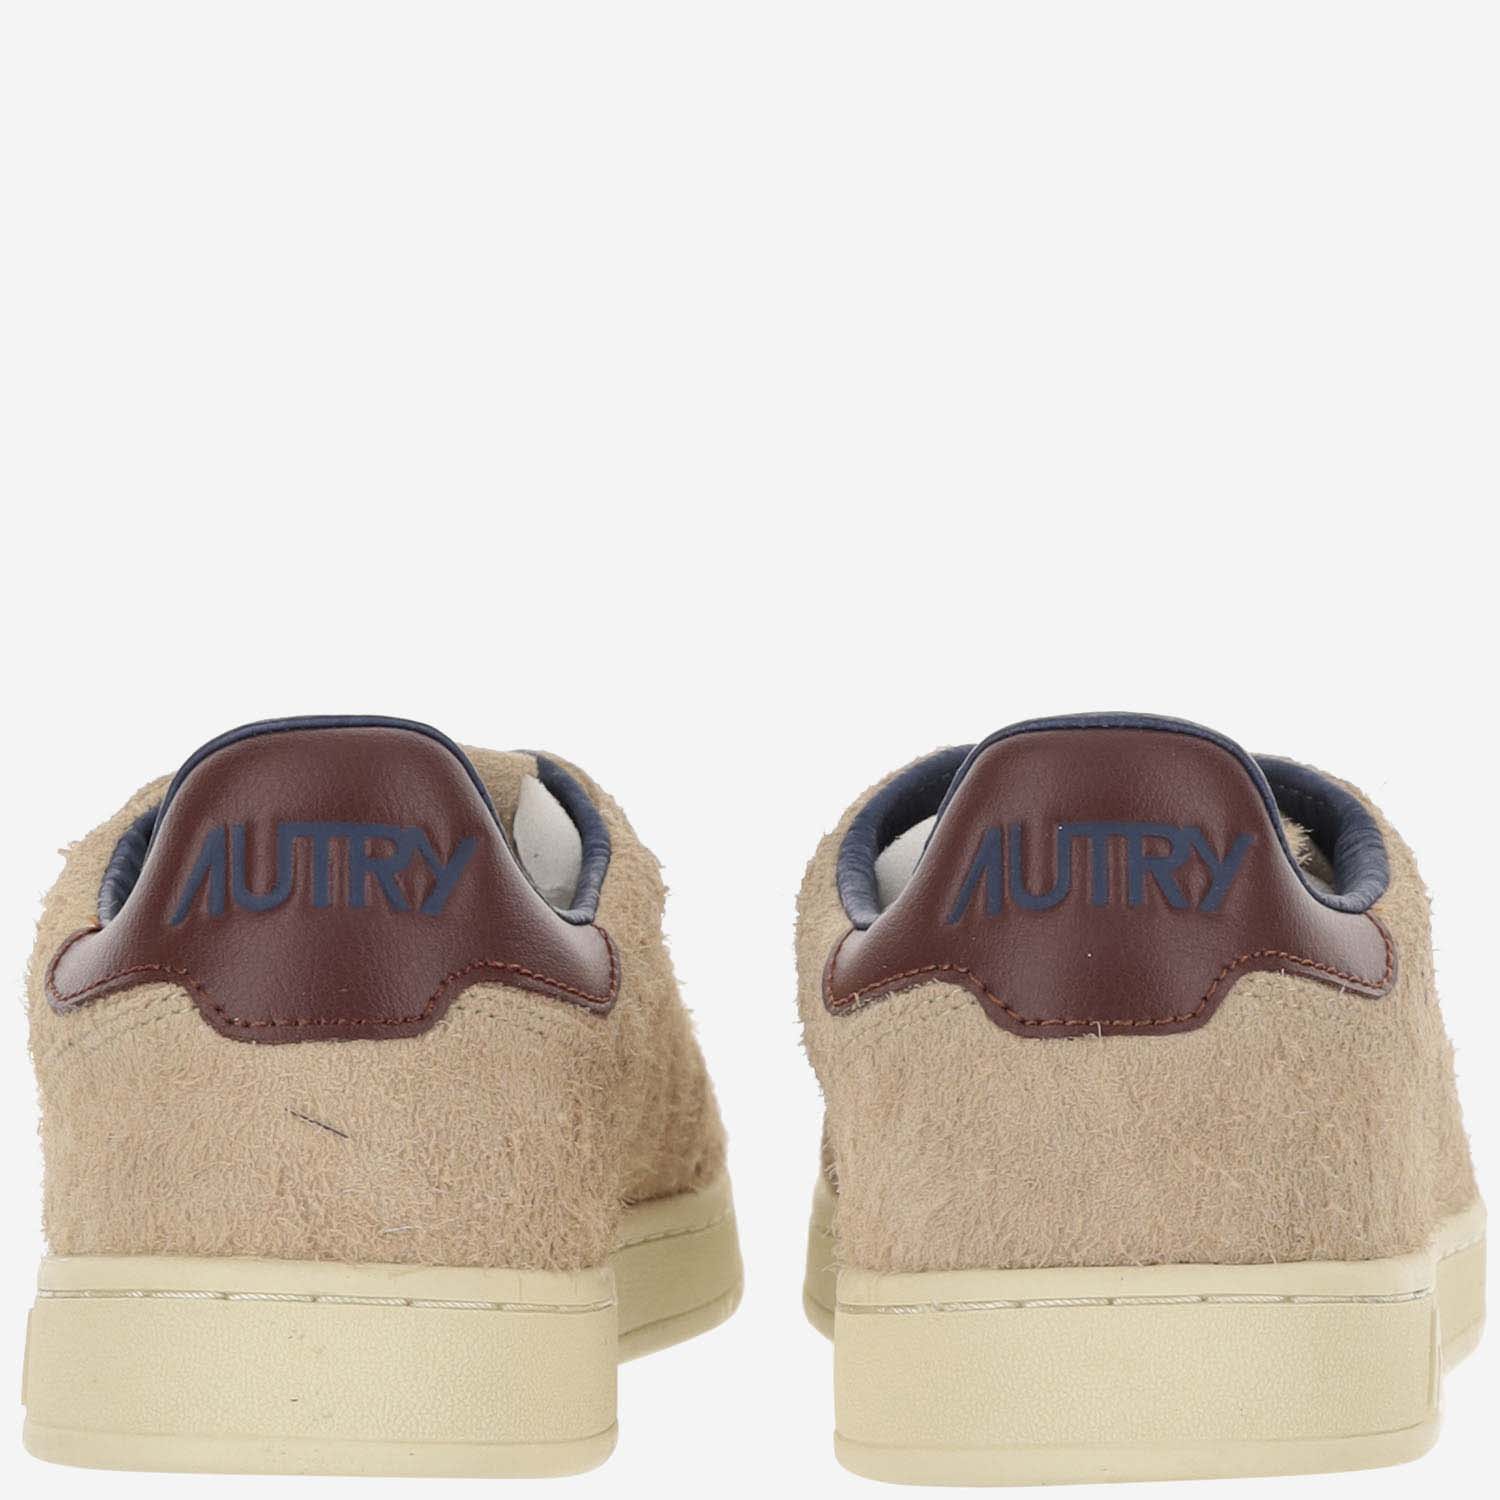 Shop Autry Medalist Low Sneakers In Suede Hair Sand Effect